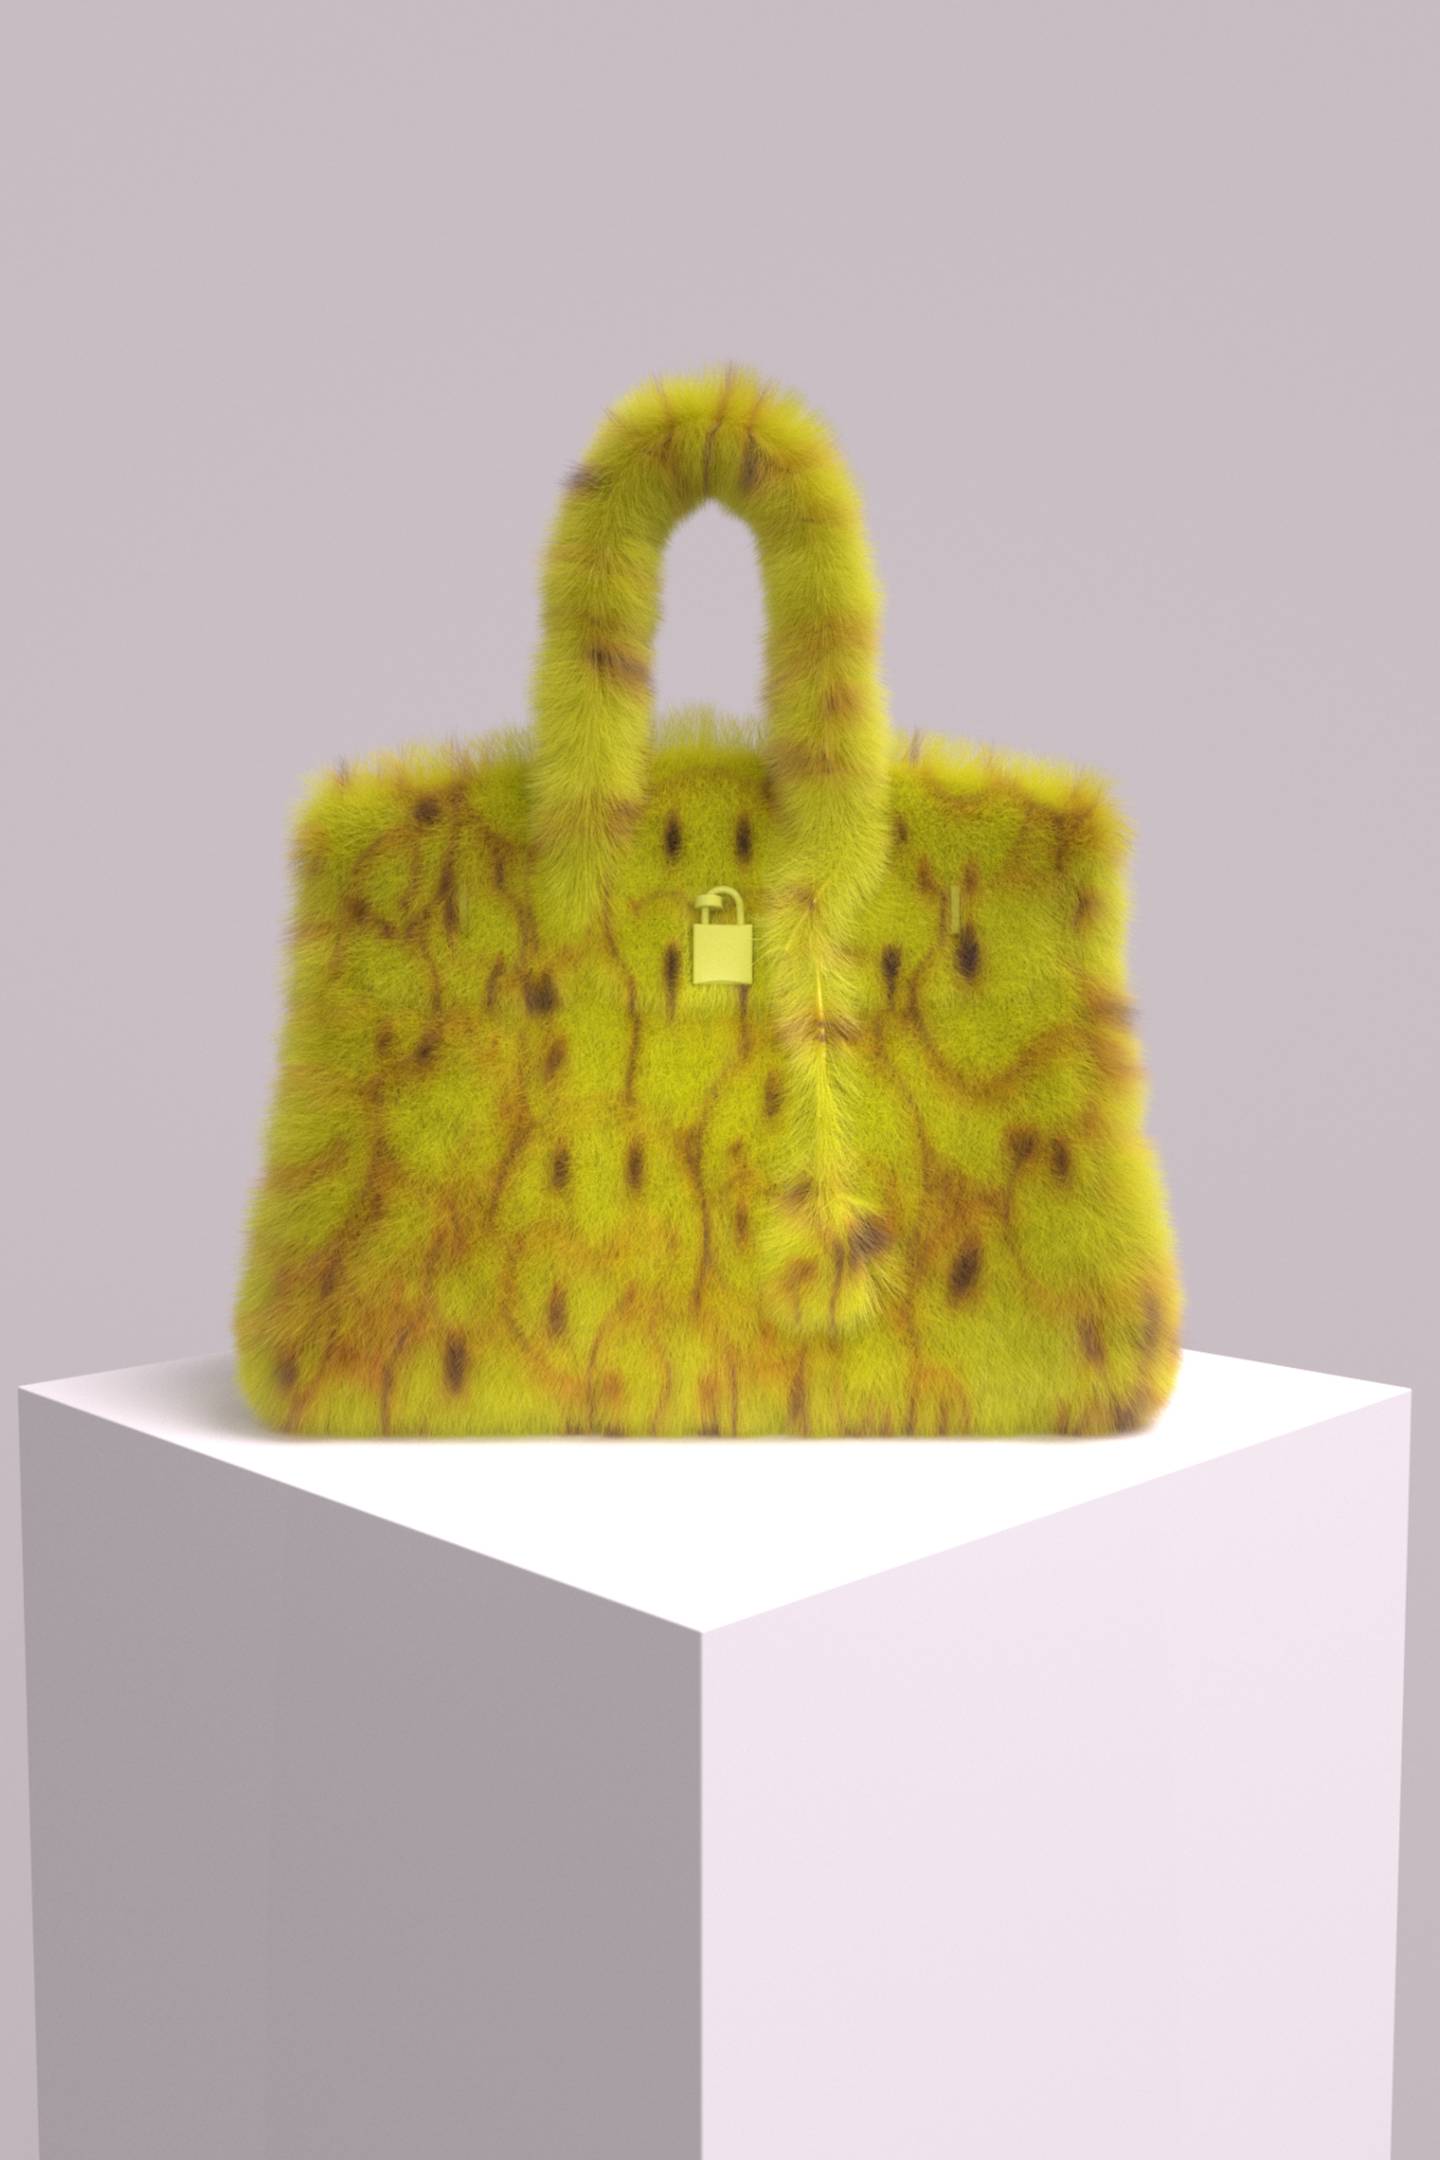 A digital interpretation of Hermès' Birkin bag rendered in yellow faux fur and overlapping smiley faces.